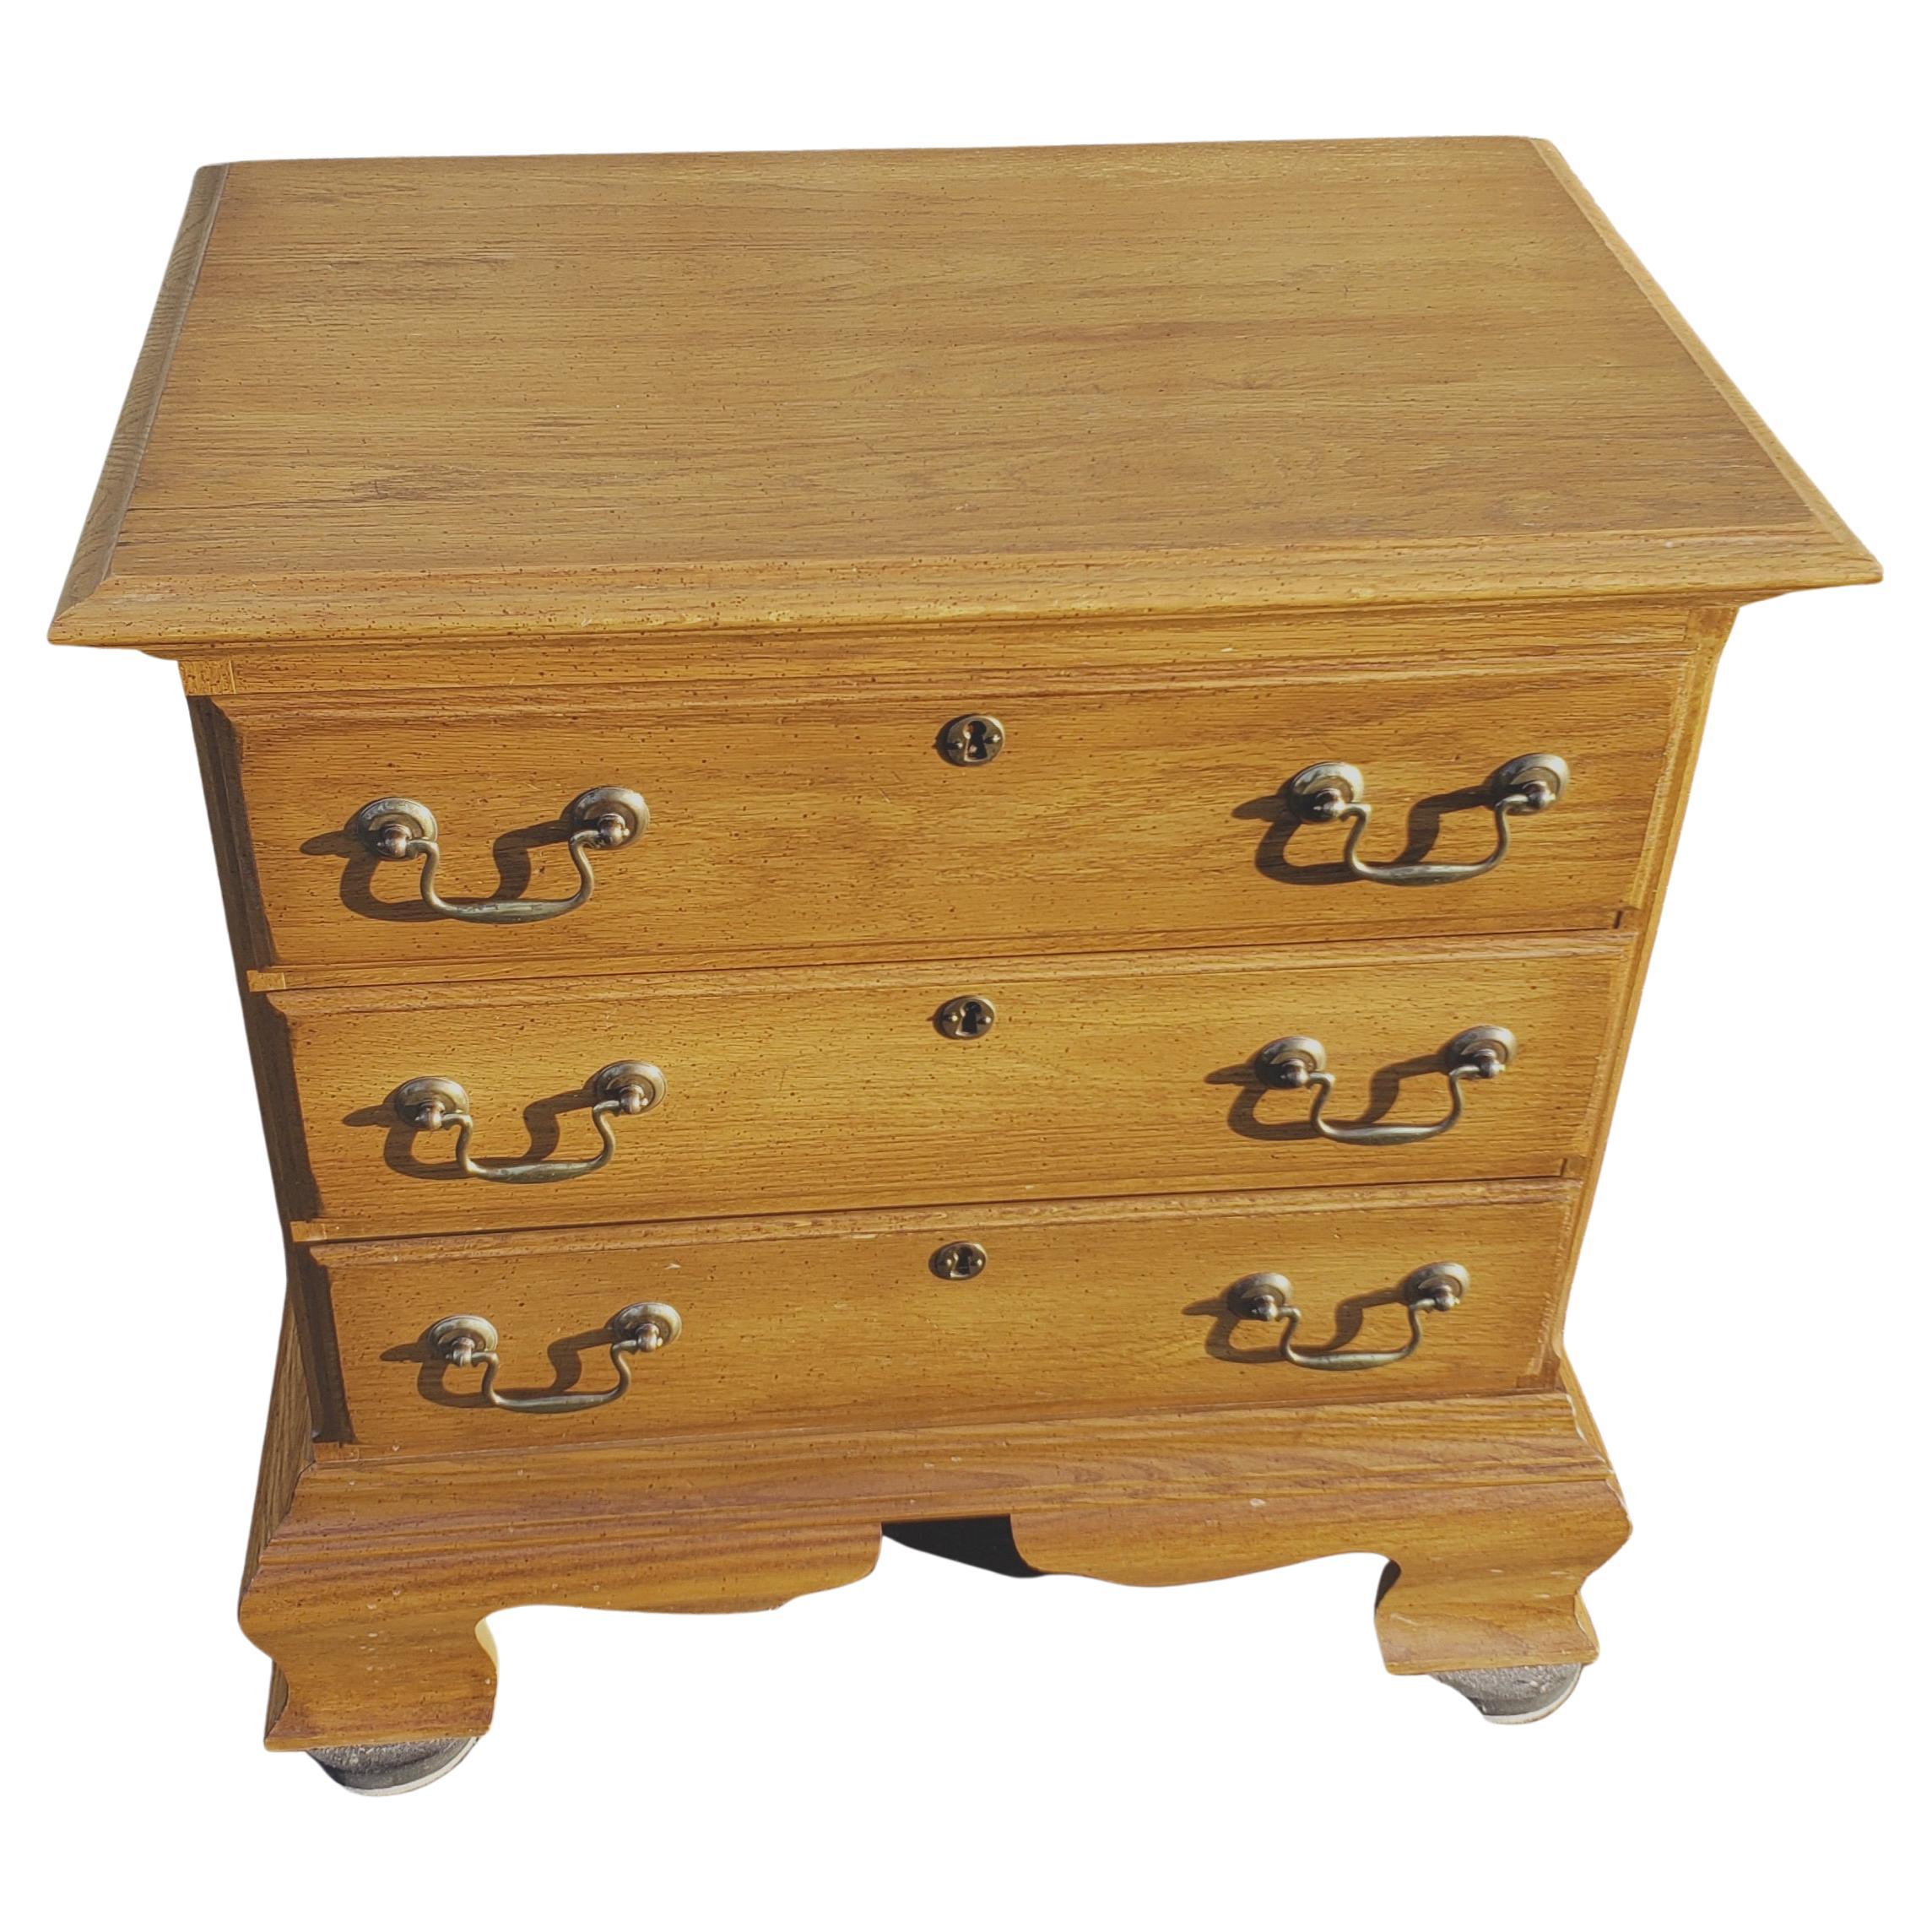 Kincaid Chippendale Oak Bedside Chest or Nightstand.
Measures 24